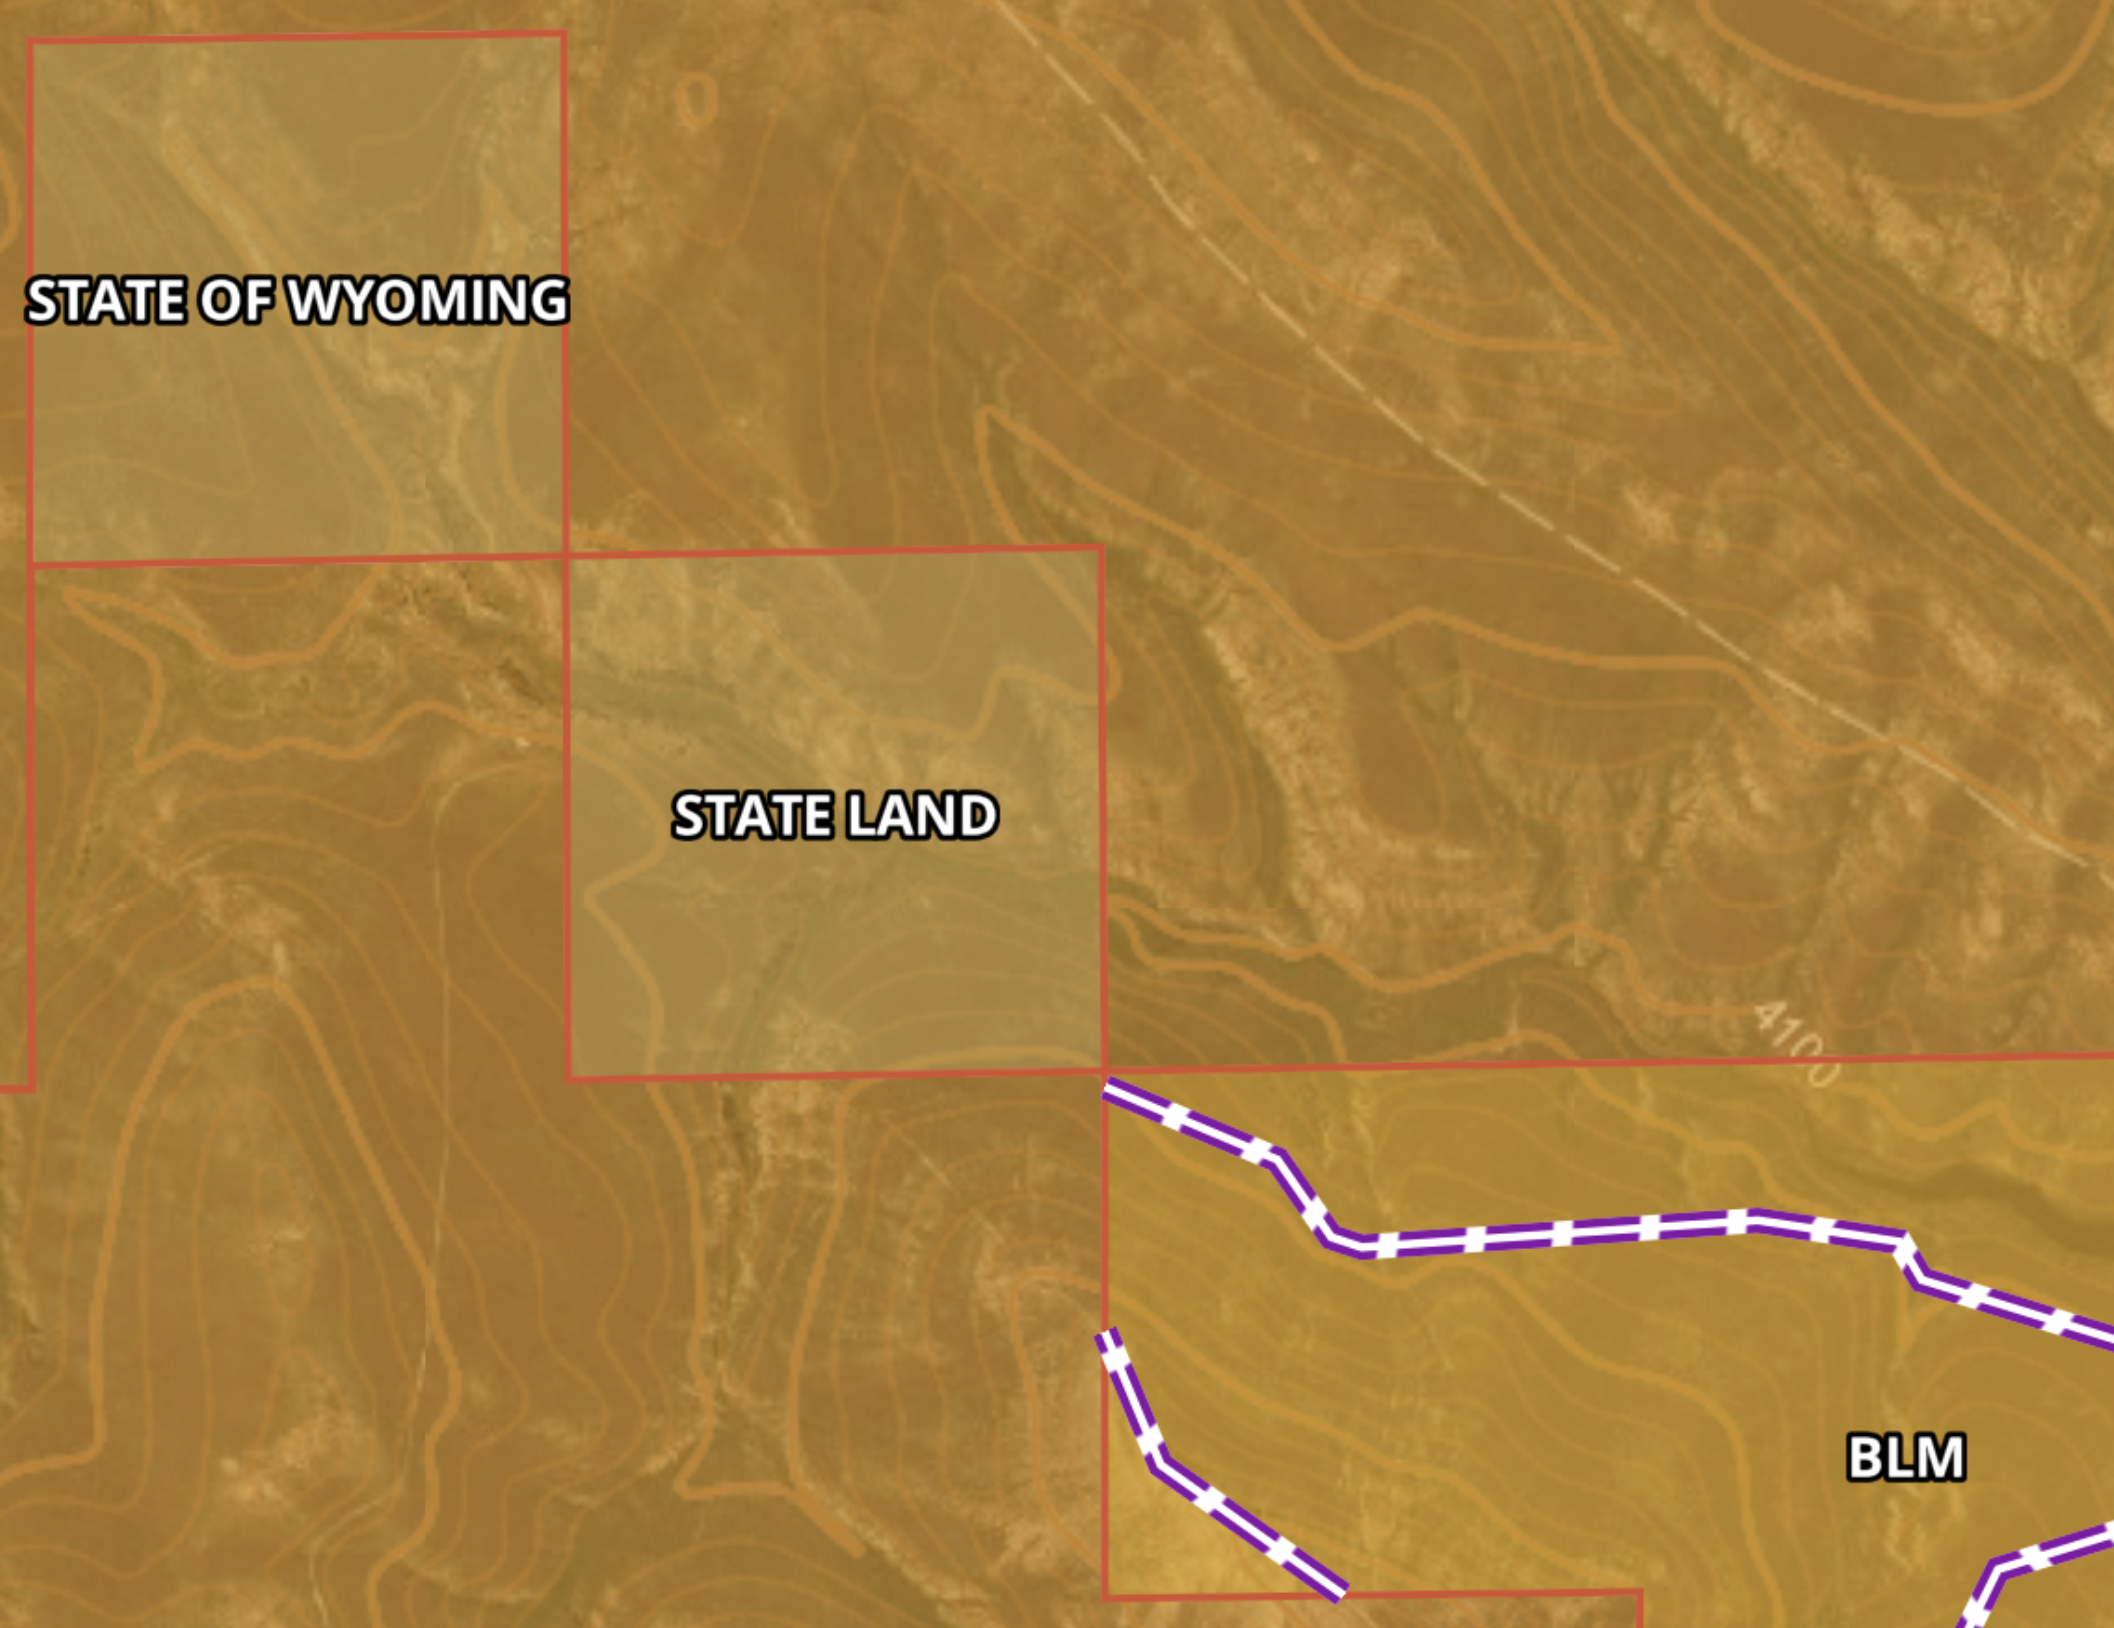 Corner crossing from state to BLM land is just one example of corner crossing.